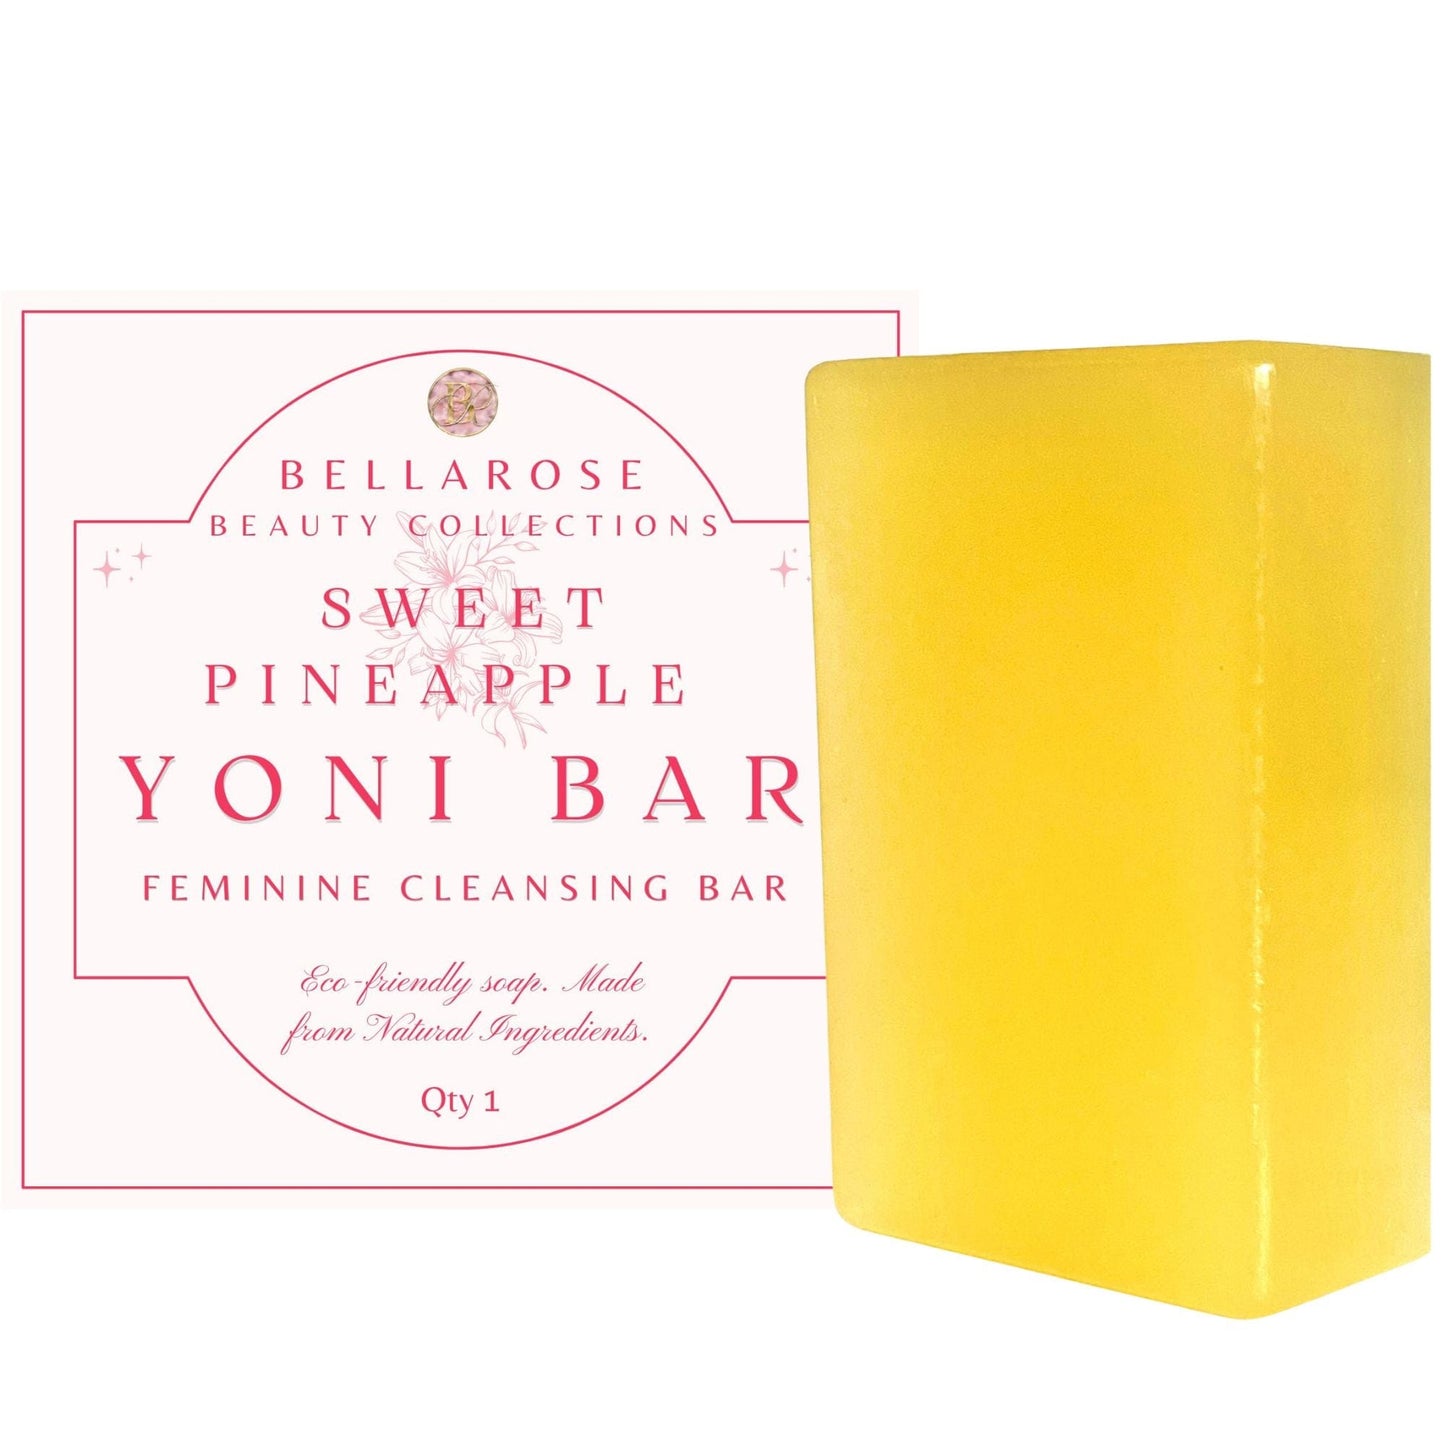 Sweet Pineapple Yoni Soap Bar 6oz | Fast and Immediate Results! (New)